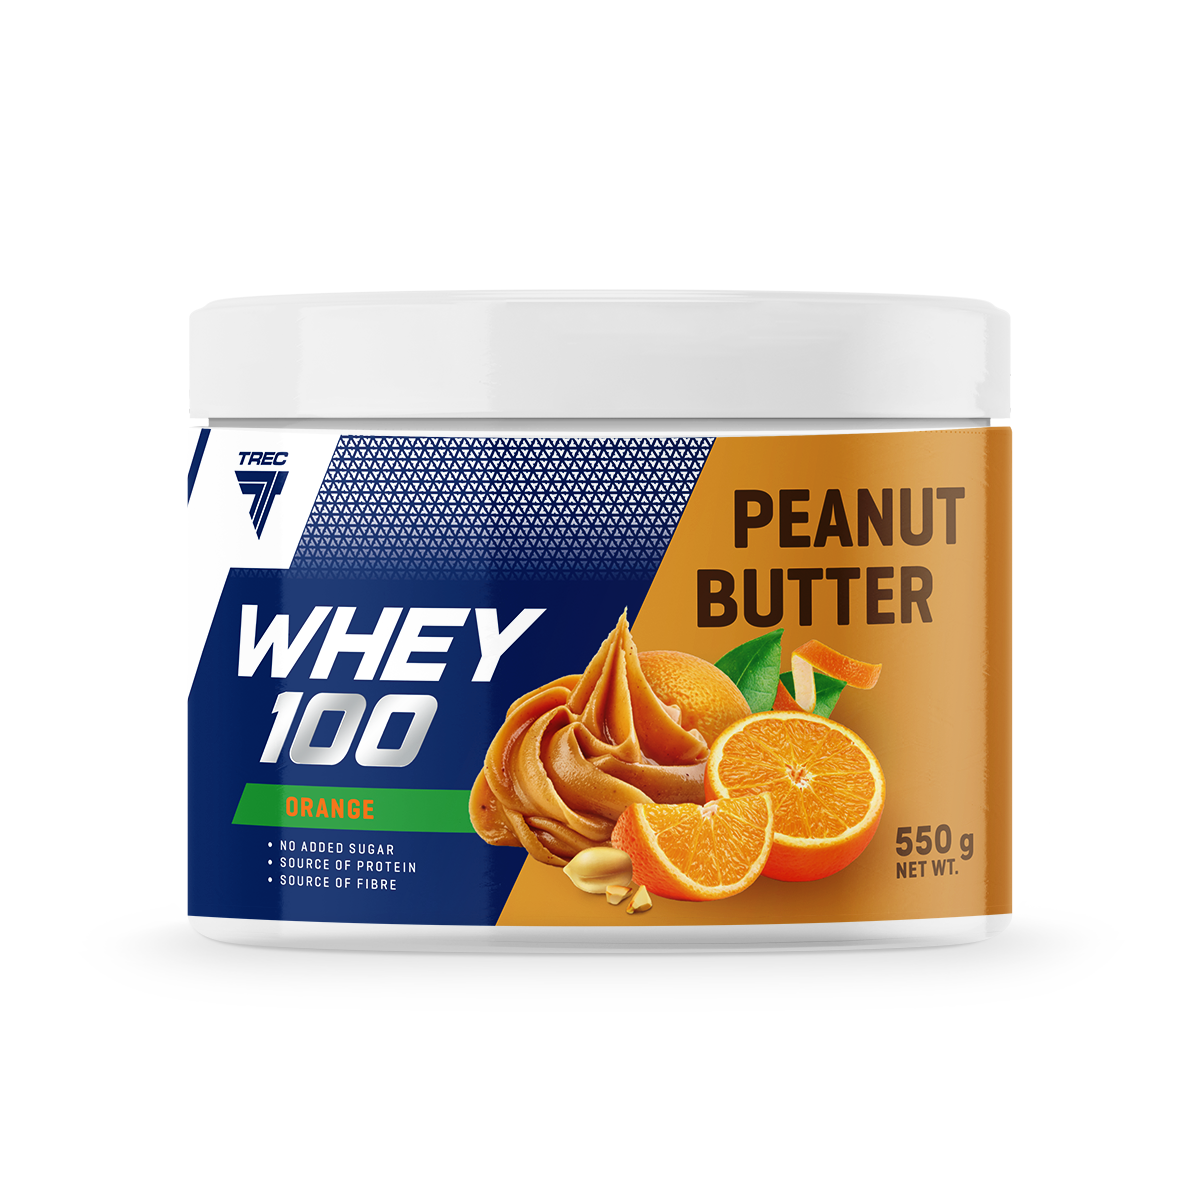 PEANUT BUTTER WHEY 100 - BBE DATE 02/24